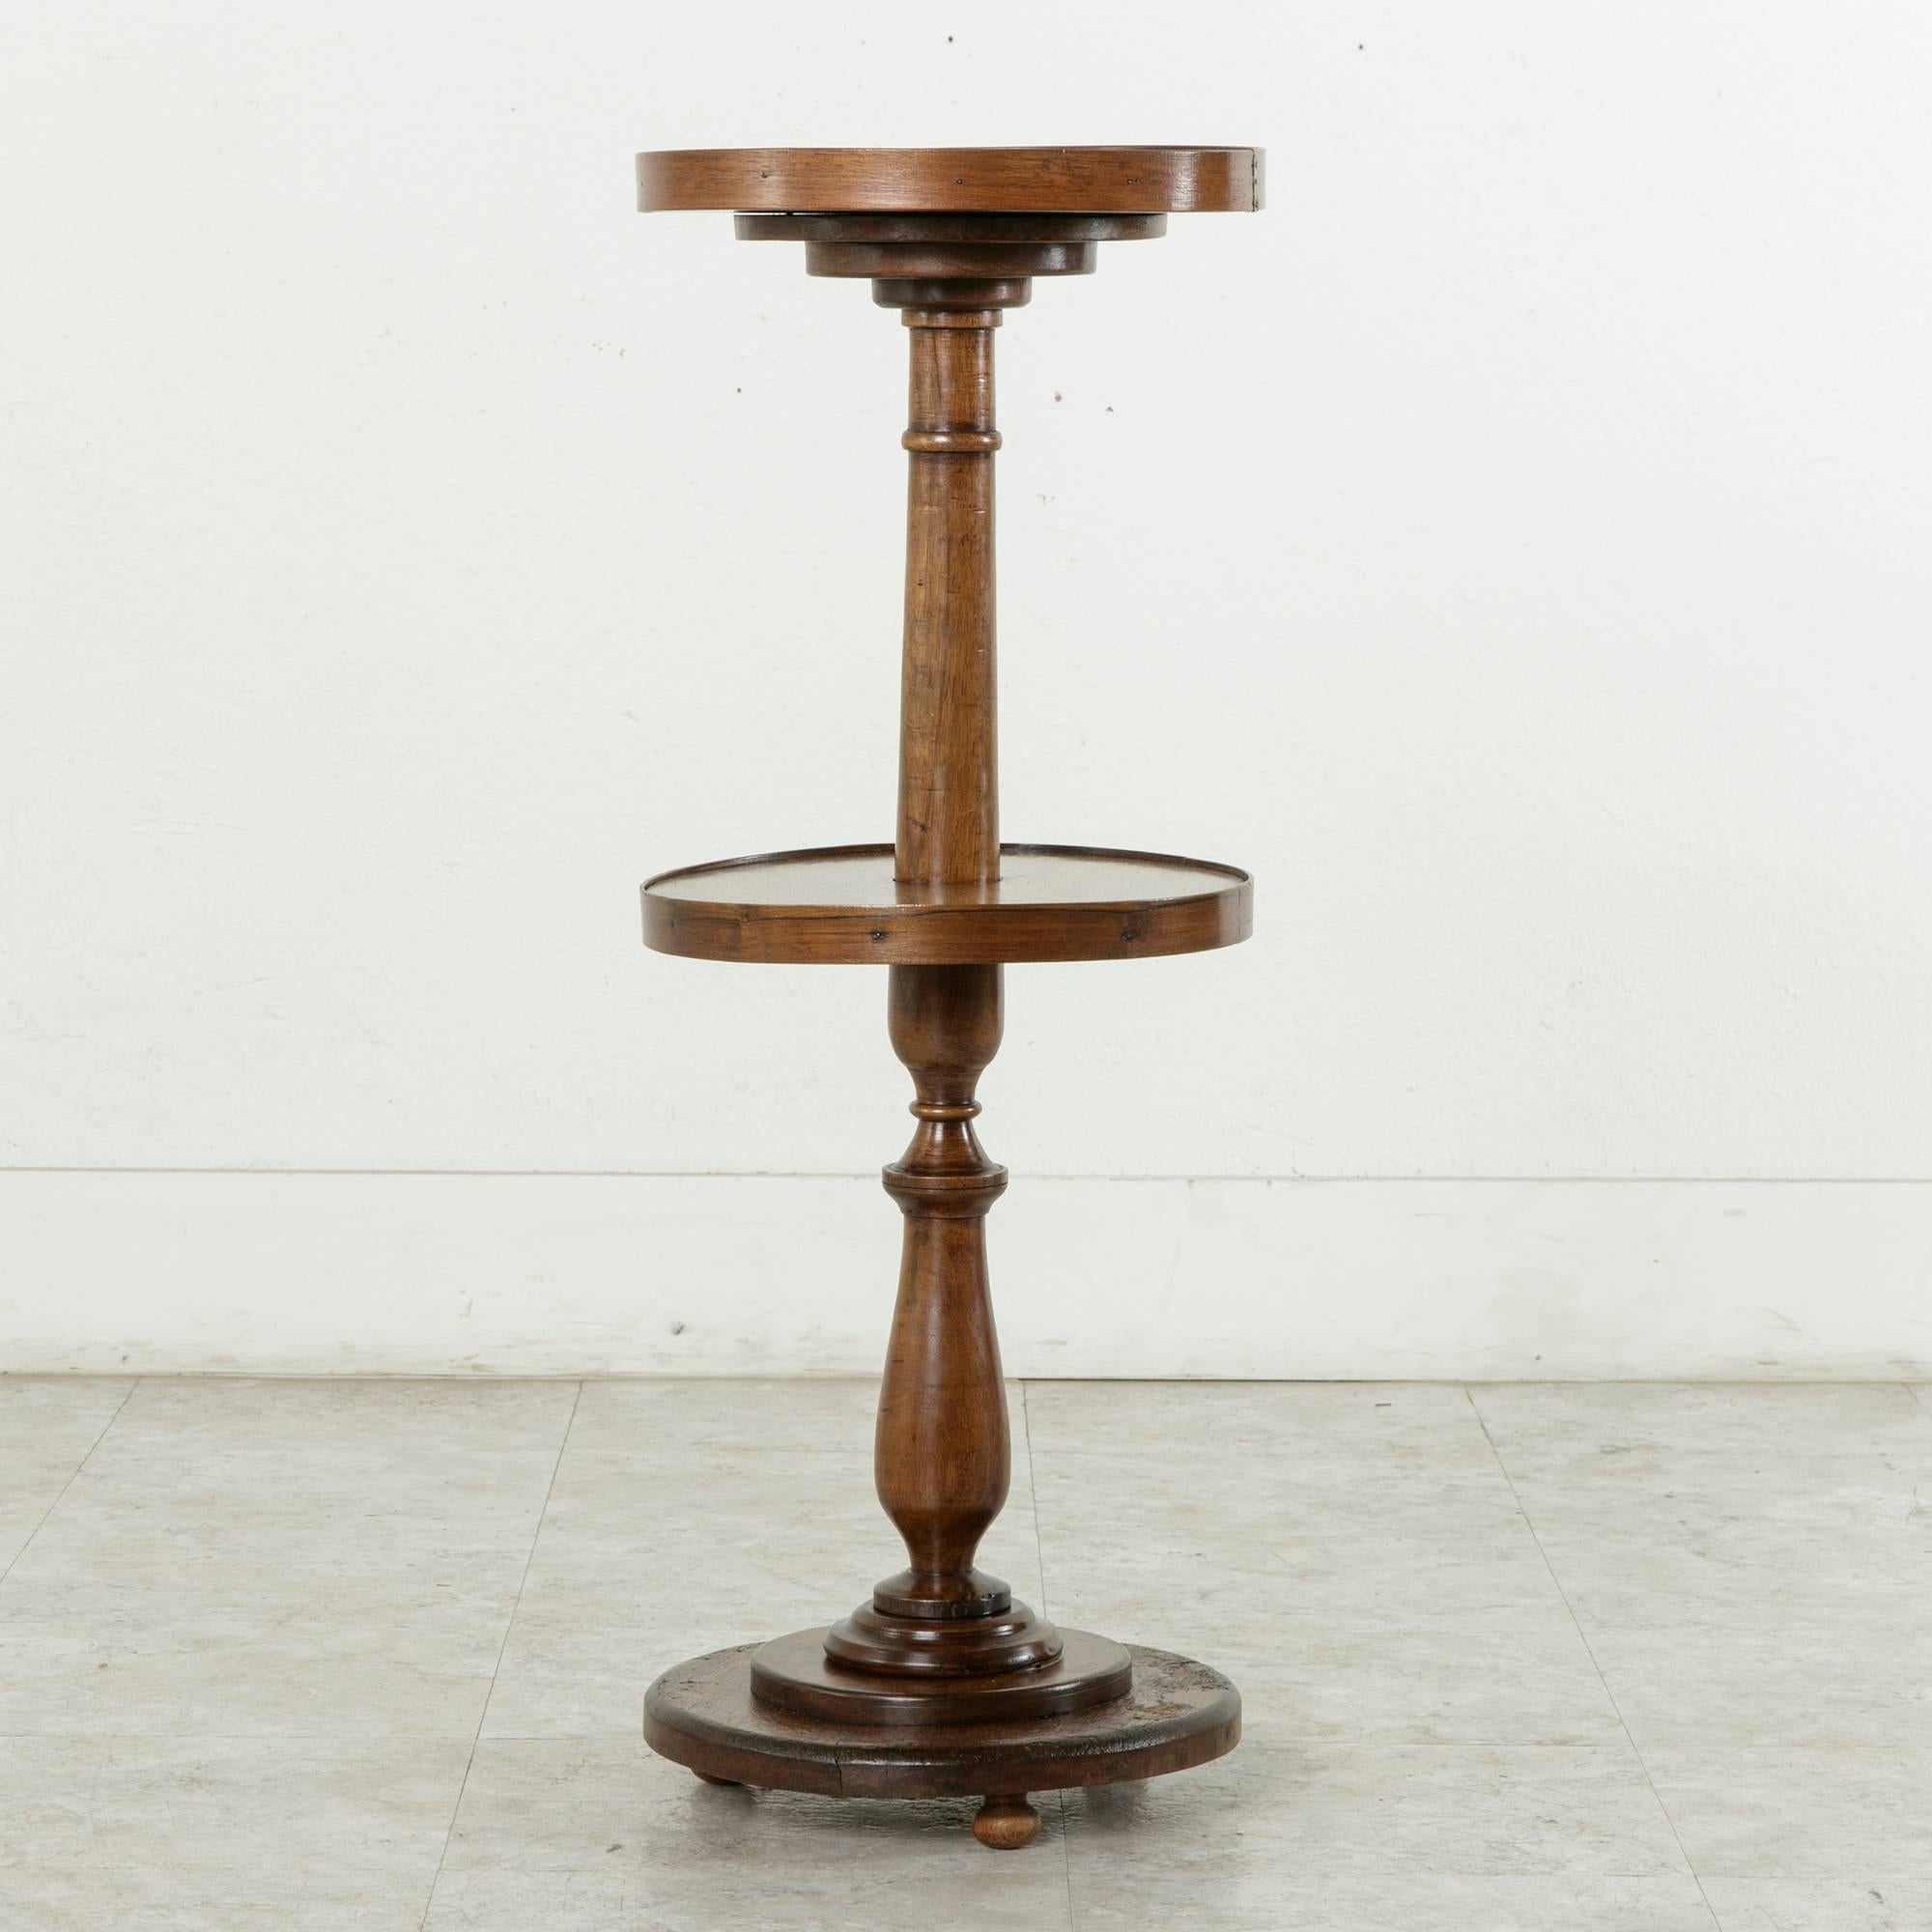 Late 19th Century French Walnut Lace Maker's Table, Pedestal, or Sculpture Stand 1